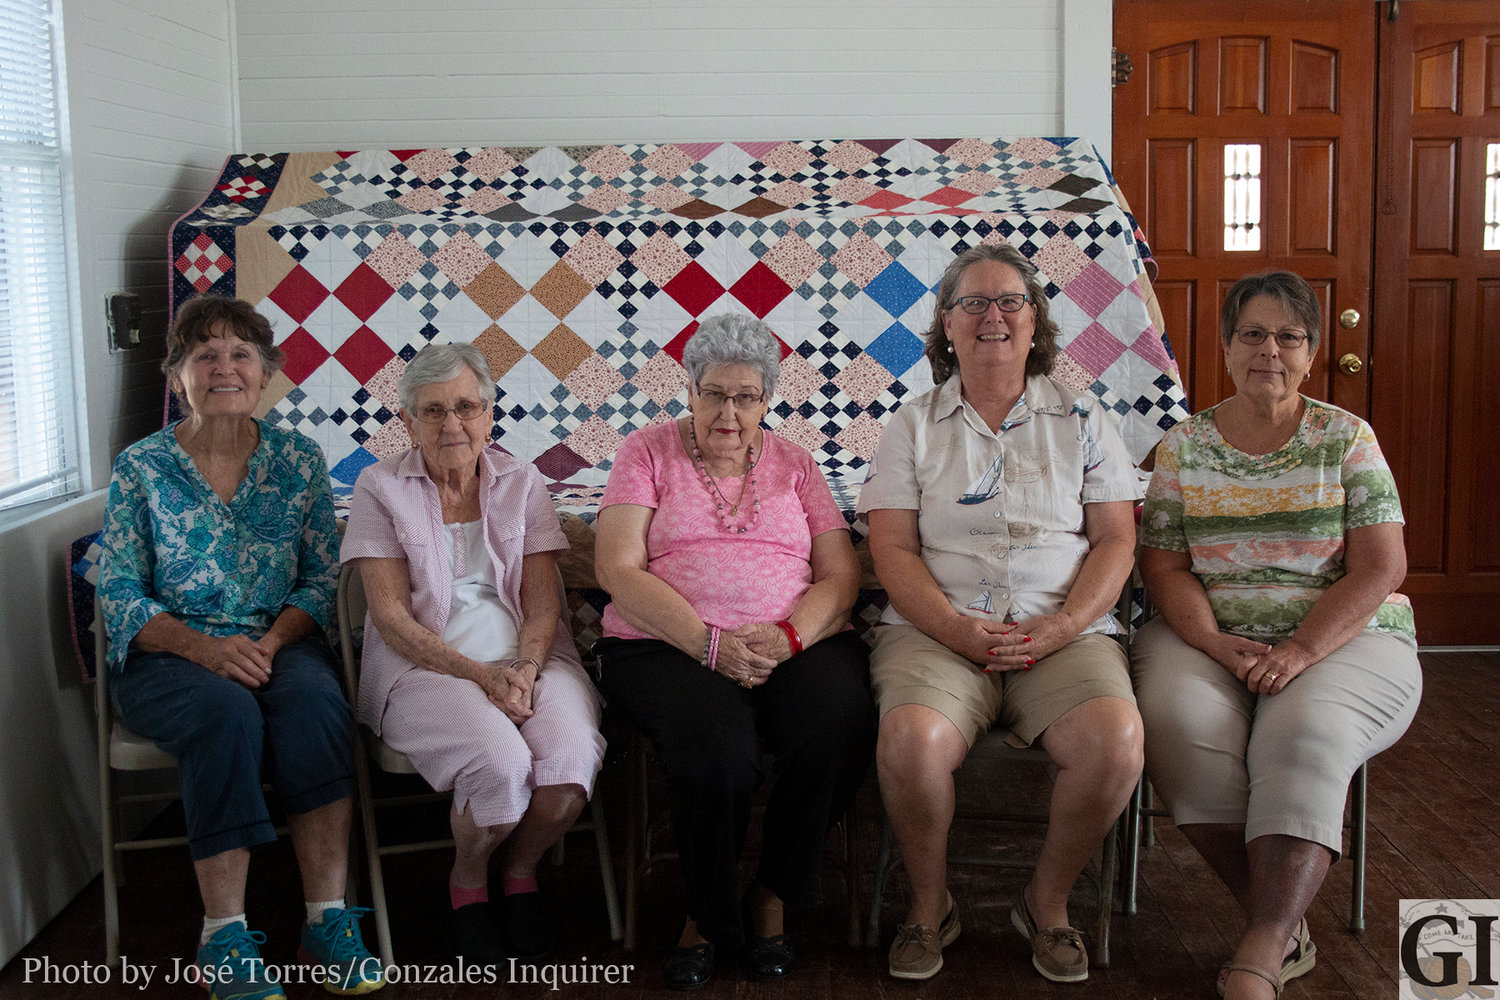 Pictured (from left) are Margie Rice, Janice Littlefield, Ruth Newberry, Missy DIrks and Frances Altwein. Other quilters who helped include Charlene Anderson, Jolene Zdebksi, Terro Porter and Helen Taylor.